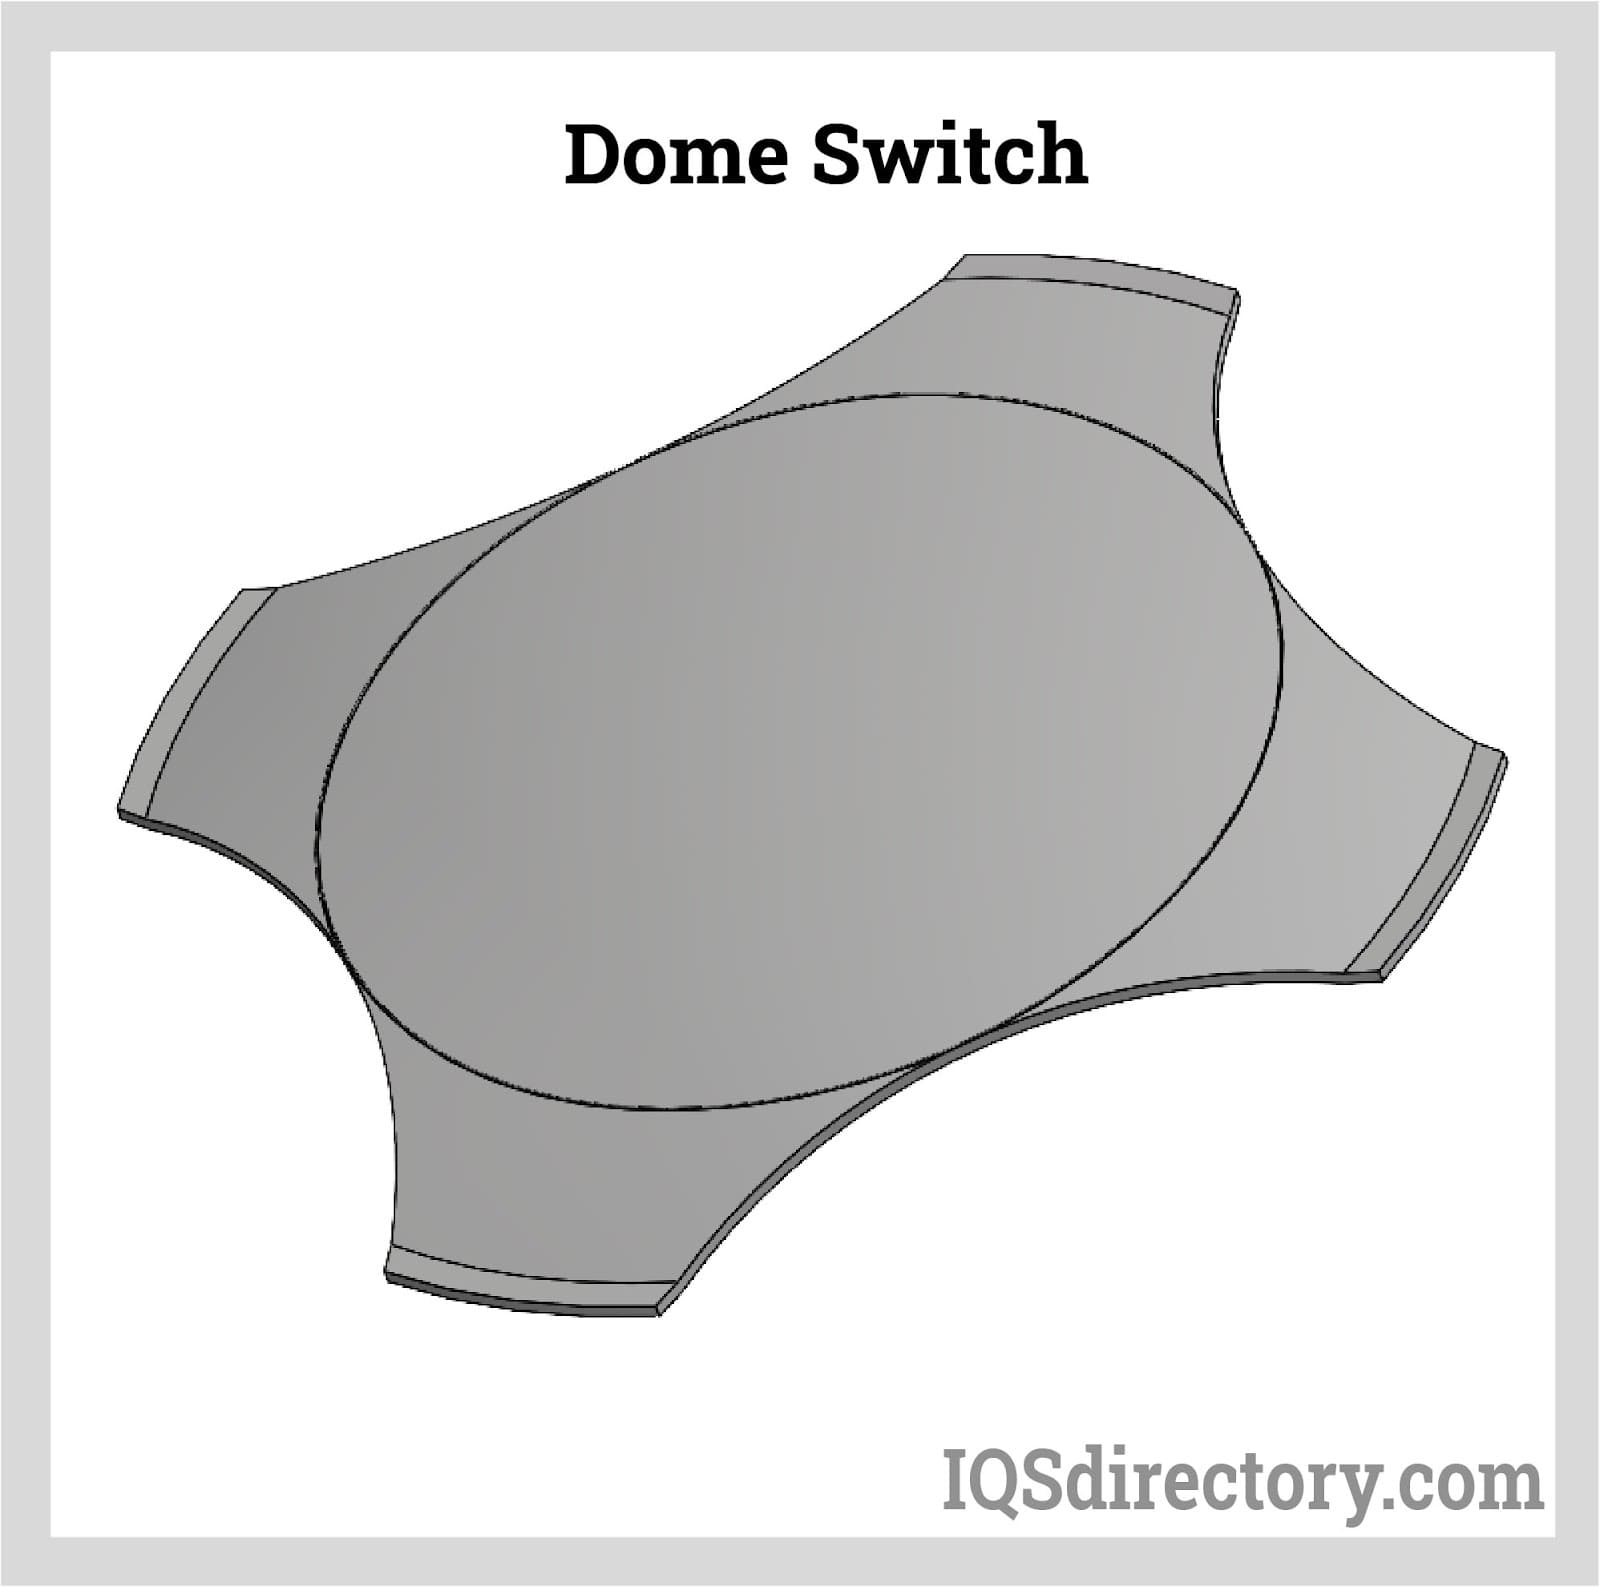 dome switch